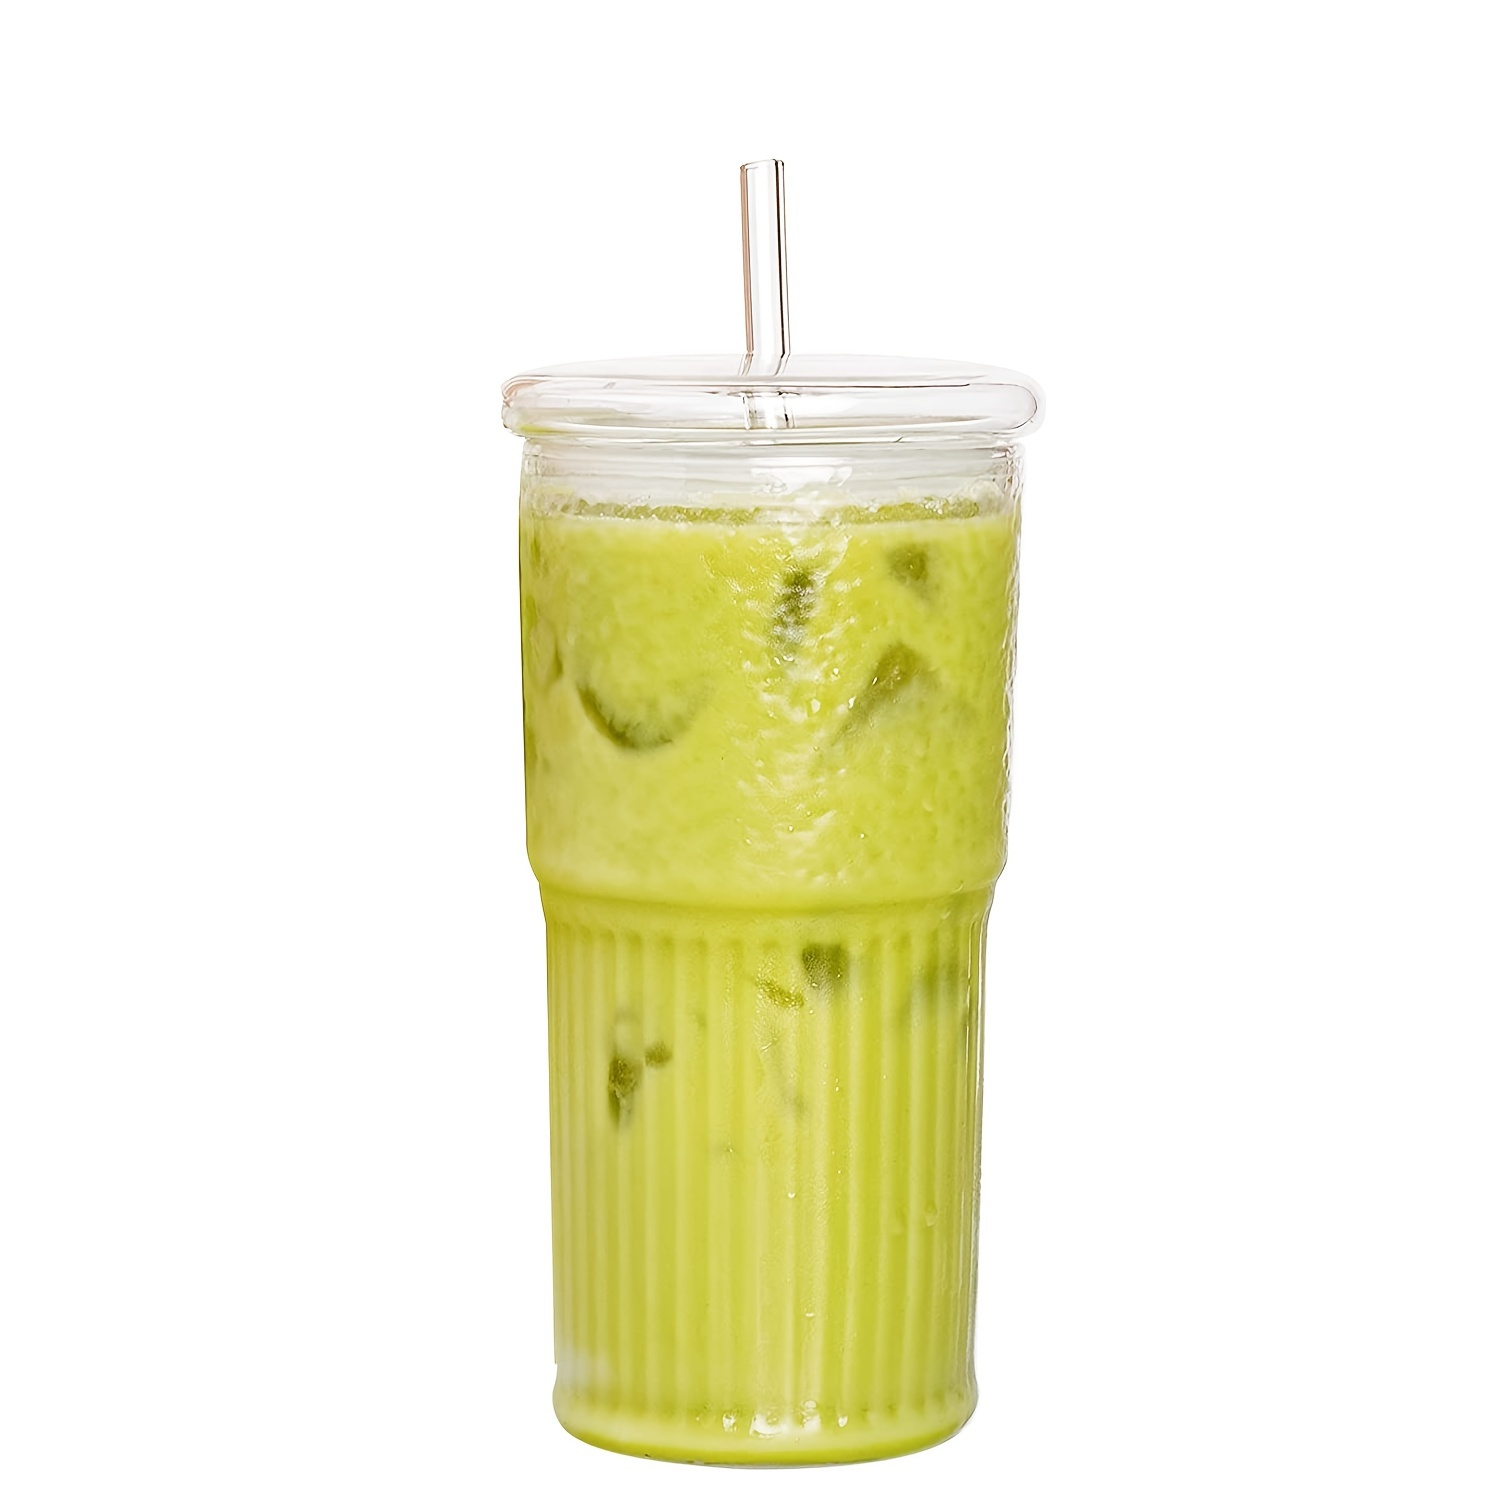 Premium Photo  Two glasses of iced matcha green tea mixed with ice cubes  and milk in high glasses on kitchen table cold matcha latte in home  interior green mocktail with ice